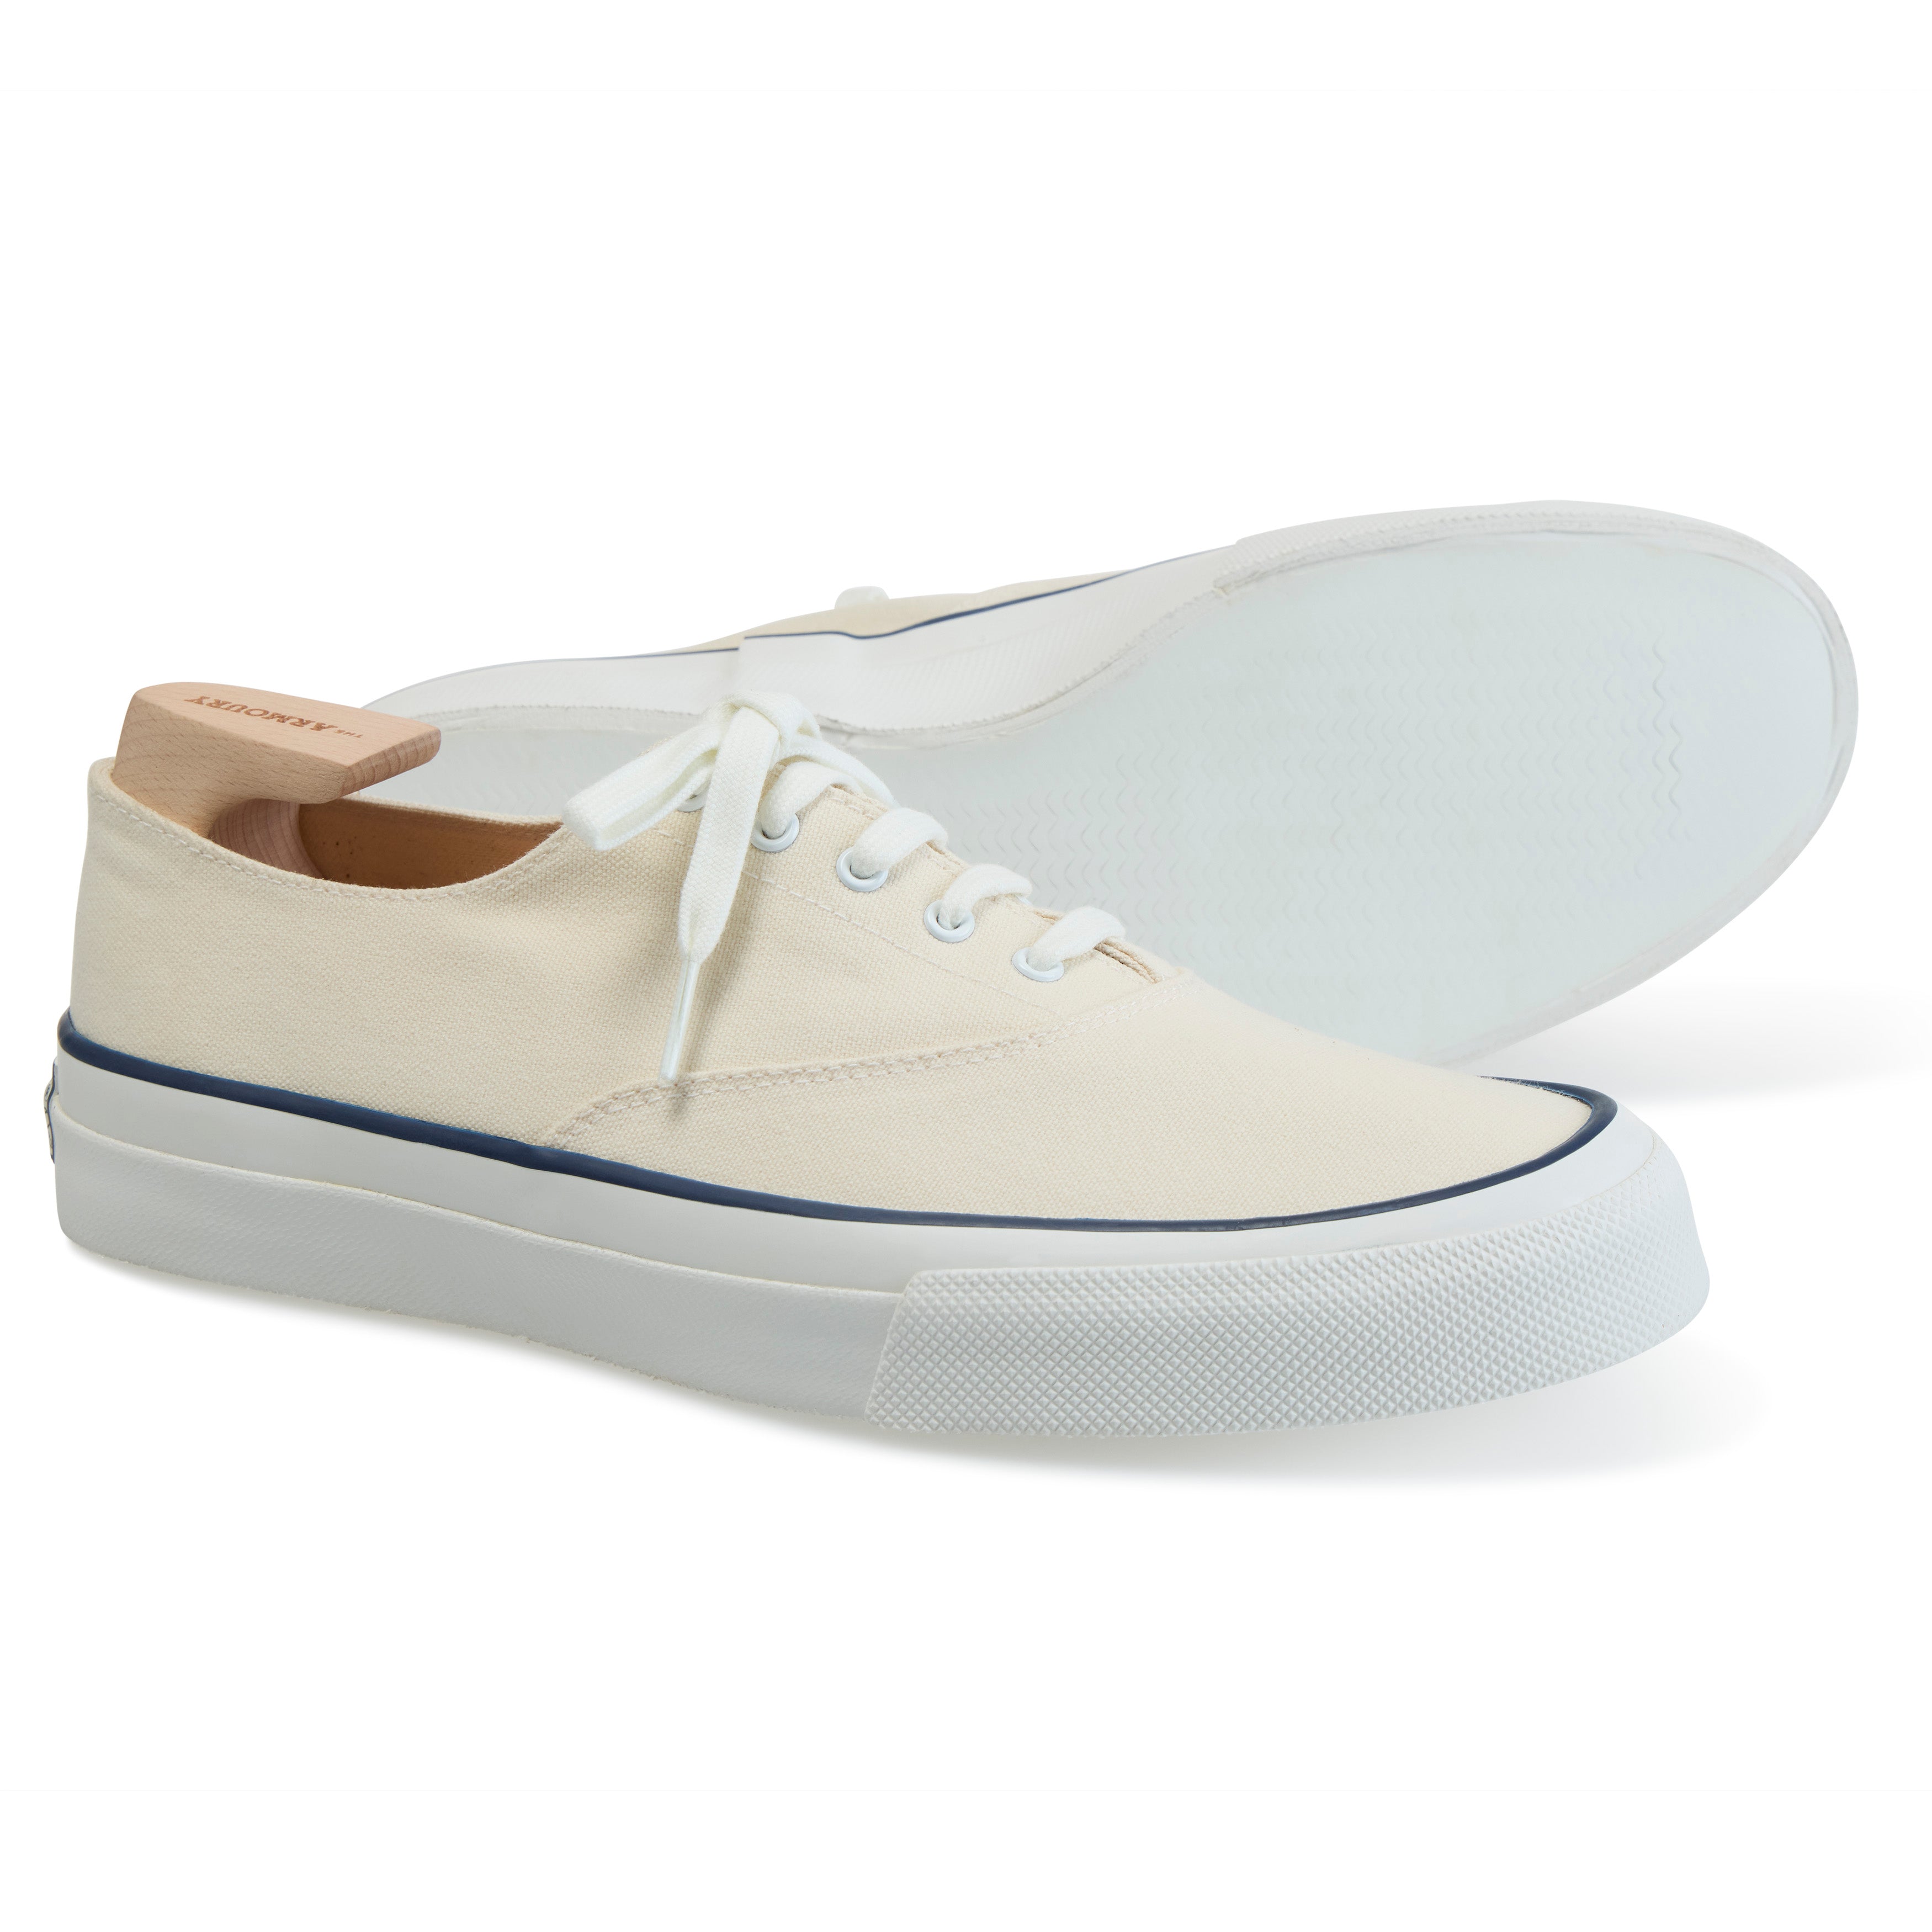 Cotton canvas sneakers